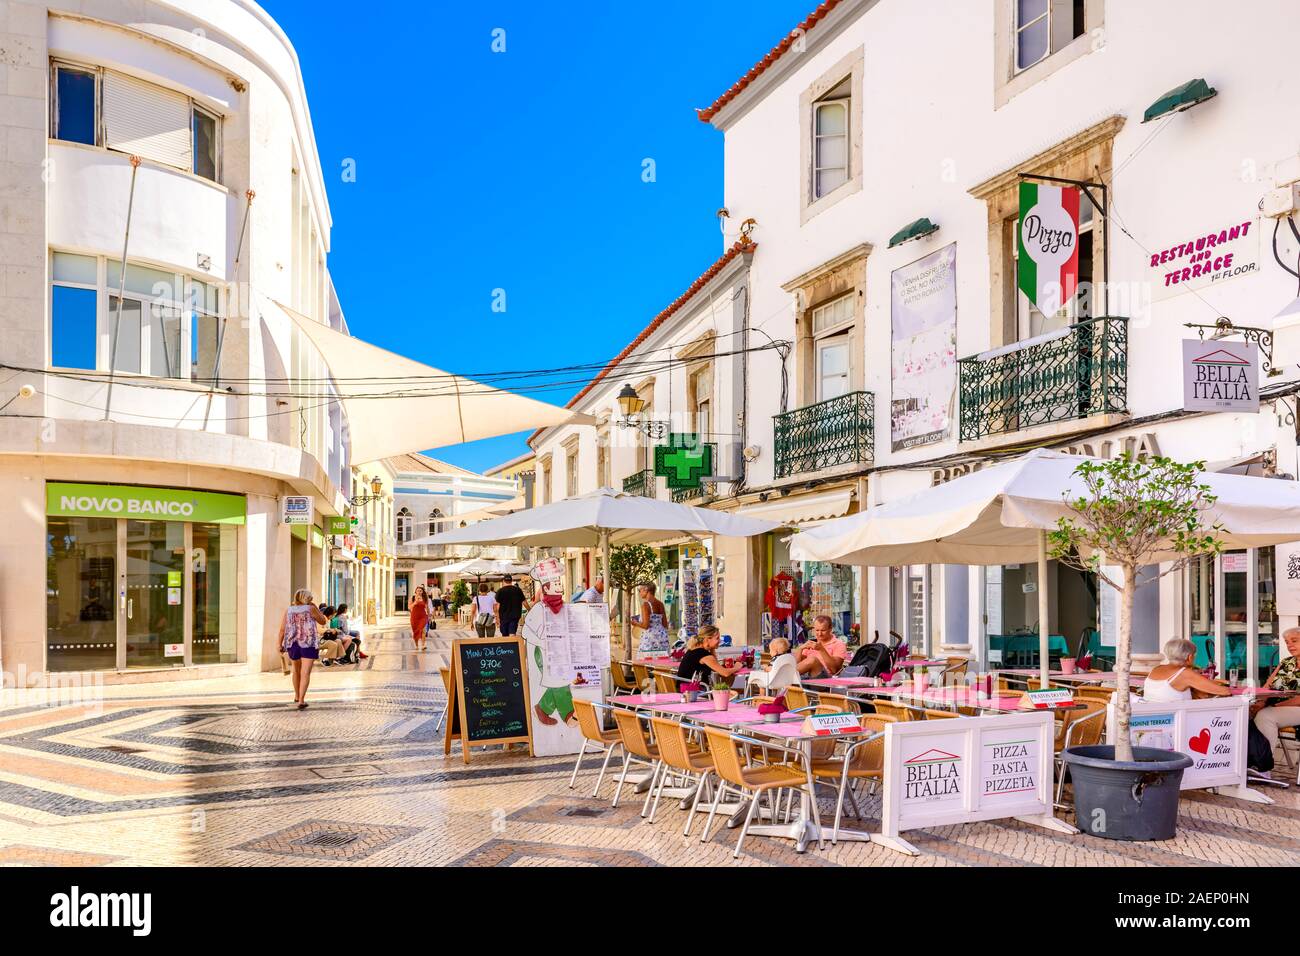 Outdoor restaurant in street paved with traditional Portuguese cobbles cobble stones, calcada, the shopping centre Faro, East Algarve Portugal. Stock Photo